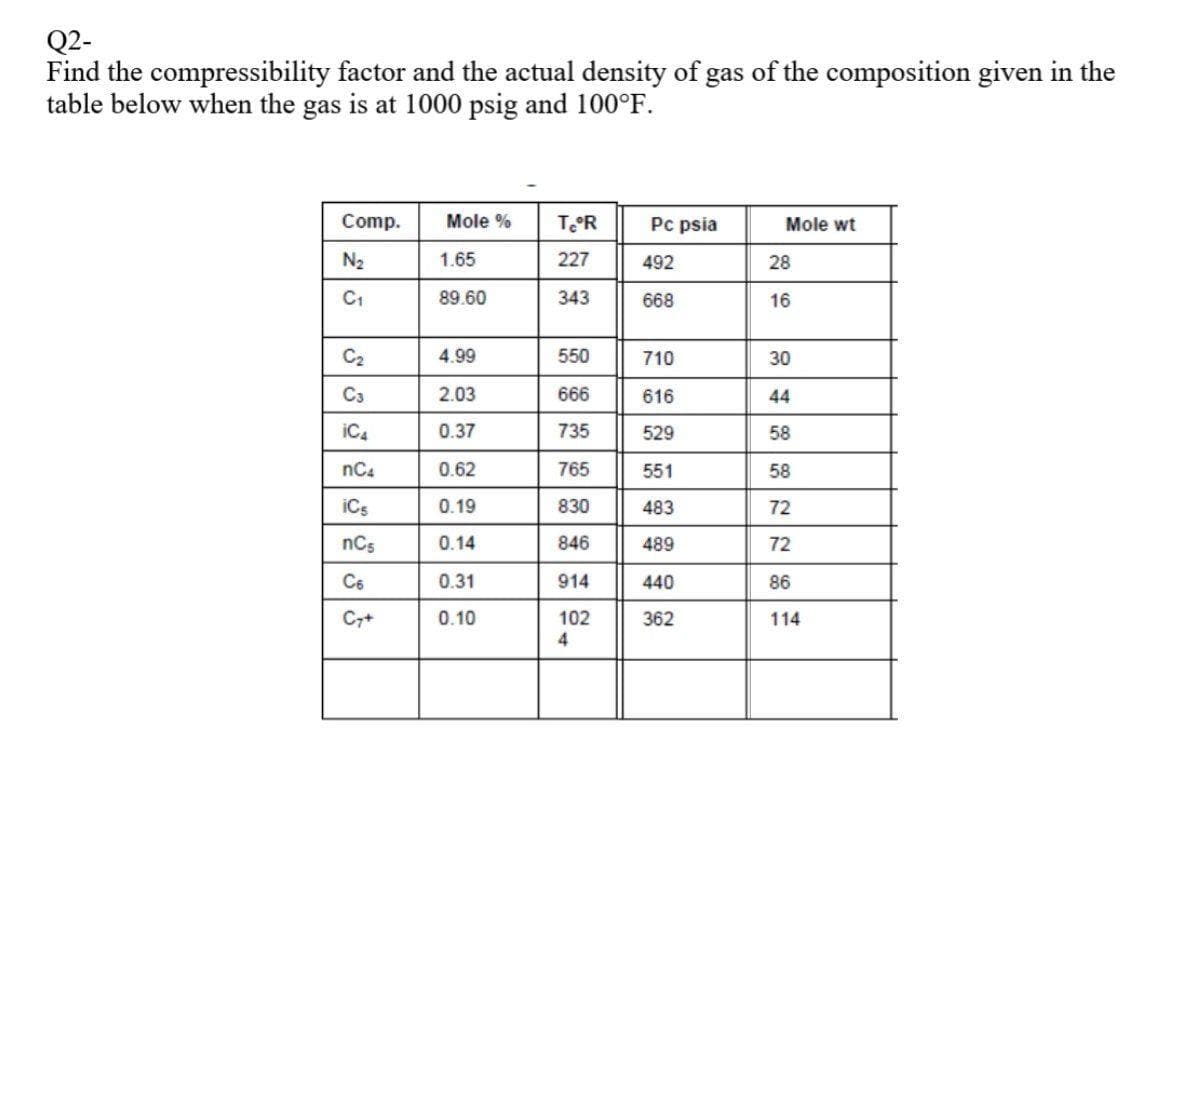 Q2-
Find the compressibility factor and the actual density of gas of the composition given in the
table below when the gas is at 1000 psig and 100°F.
Comp.
N₂
C₁
C₂
C3
iC4
nC4
iCs
nC5
C6
Cy+
Mole %
1.65
89.60
4.99
2.03
0.37
0.62
0.19
0.14
0.31
0.10
TeºR
227
343
550
666
735
765
830
846
914
102
4
Pc psia
492
668
710
616
529
551
483
489
440
362
Mole wt
28
16
30
44
58
58
72
72
86
114